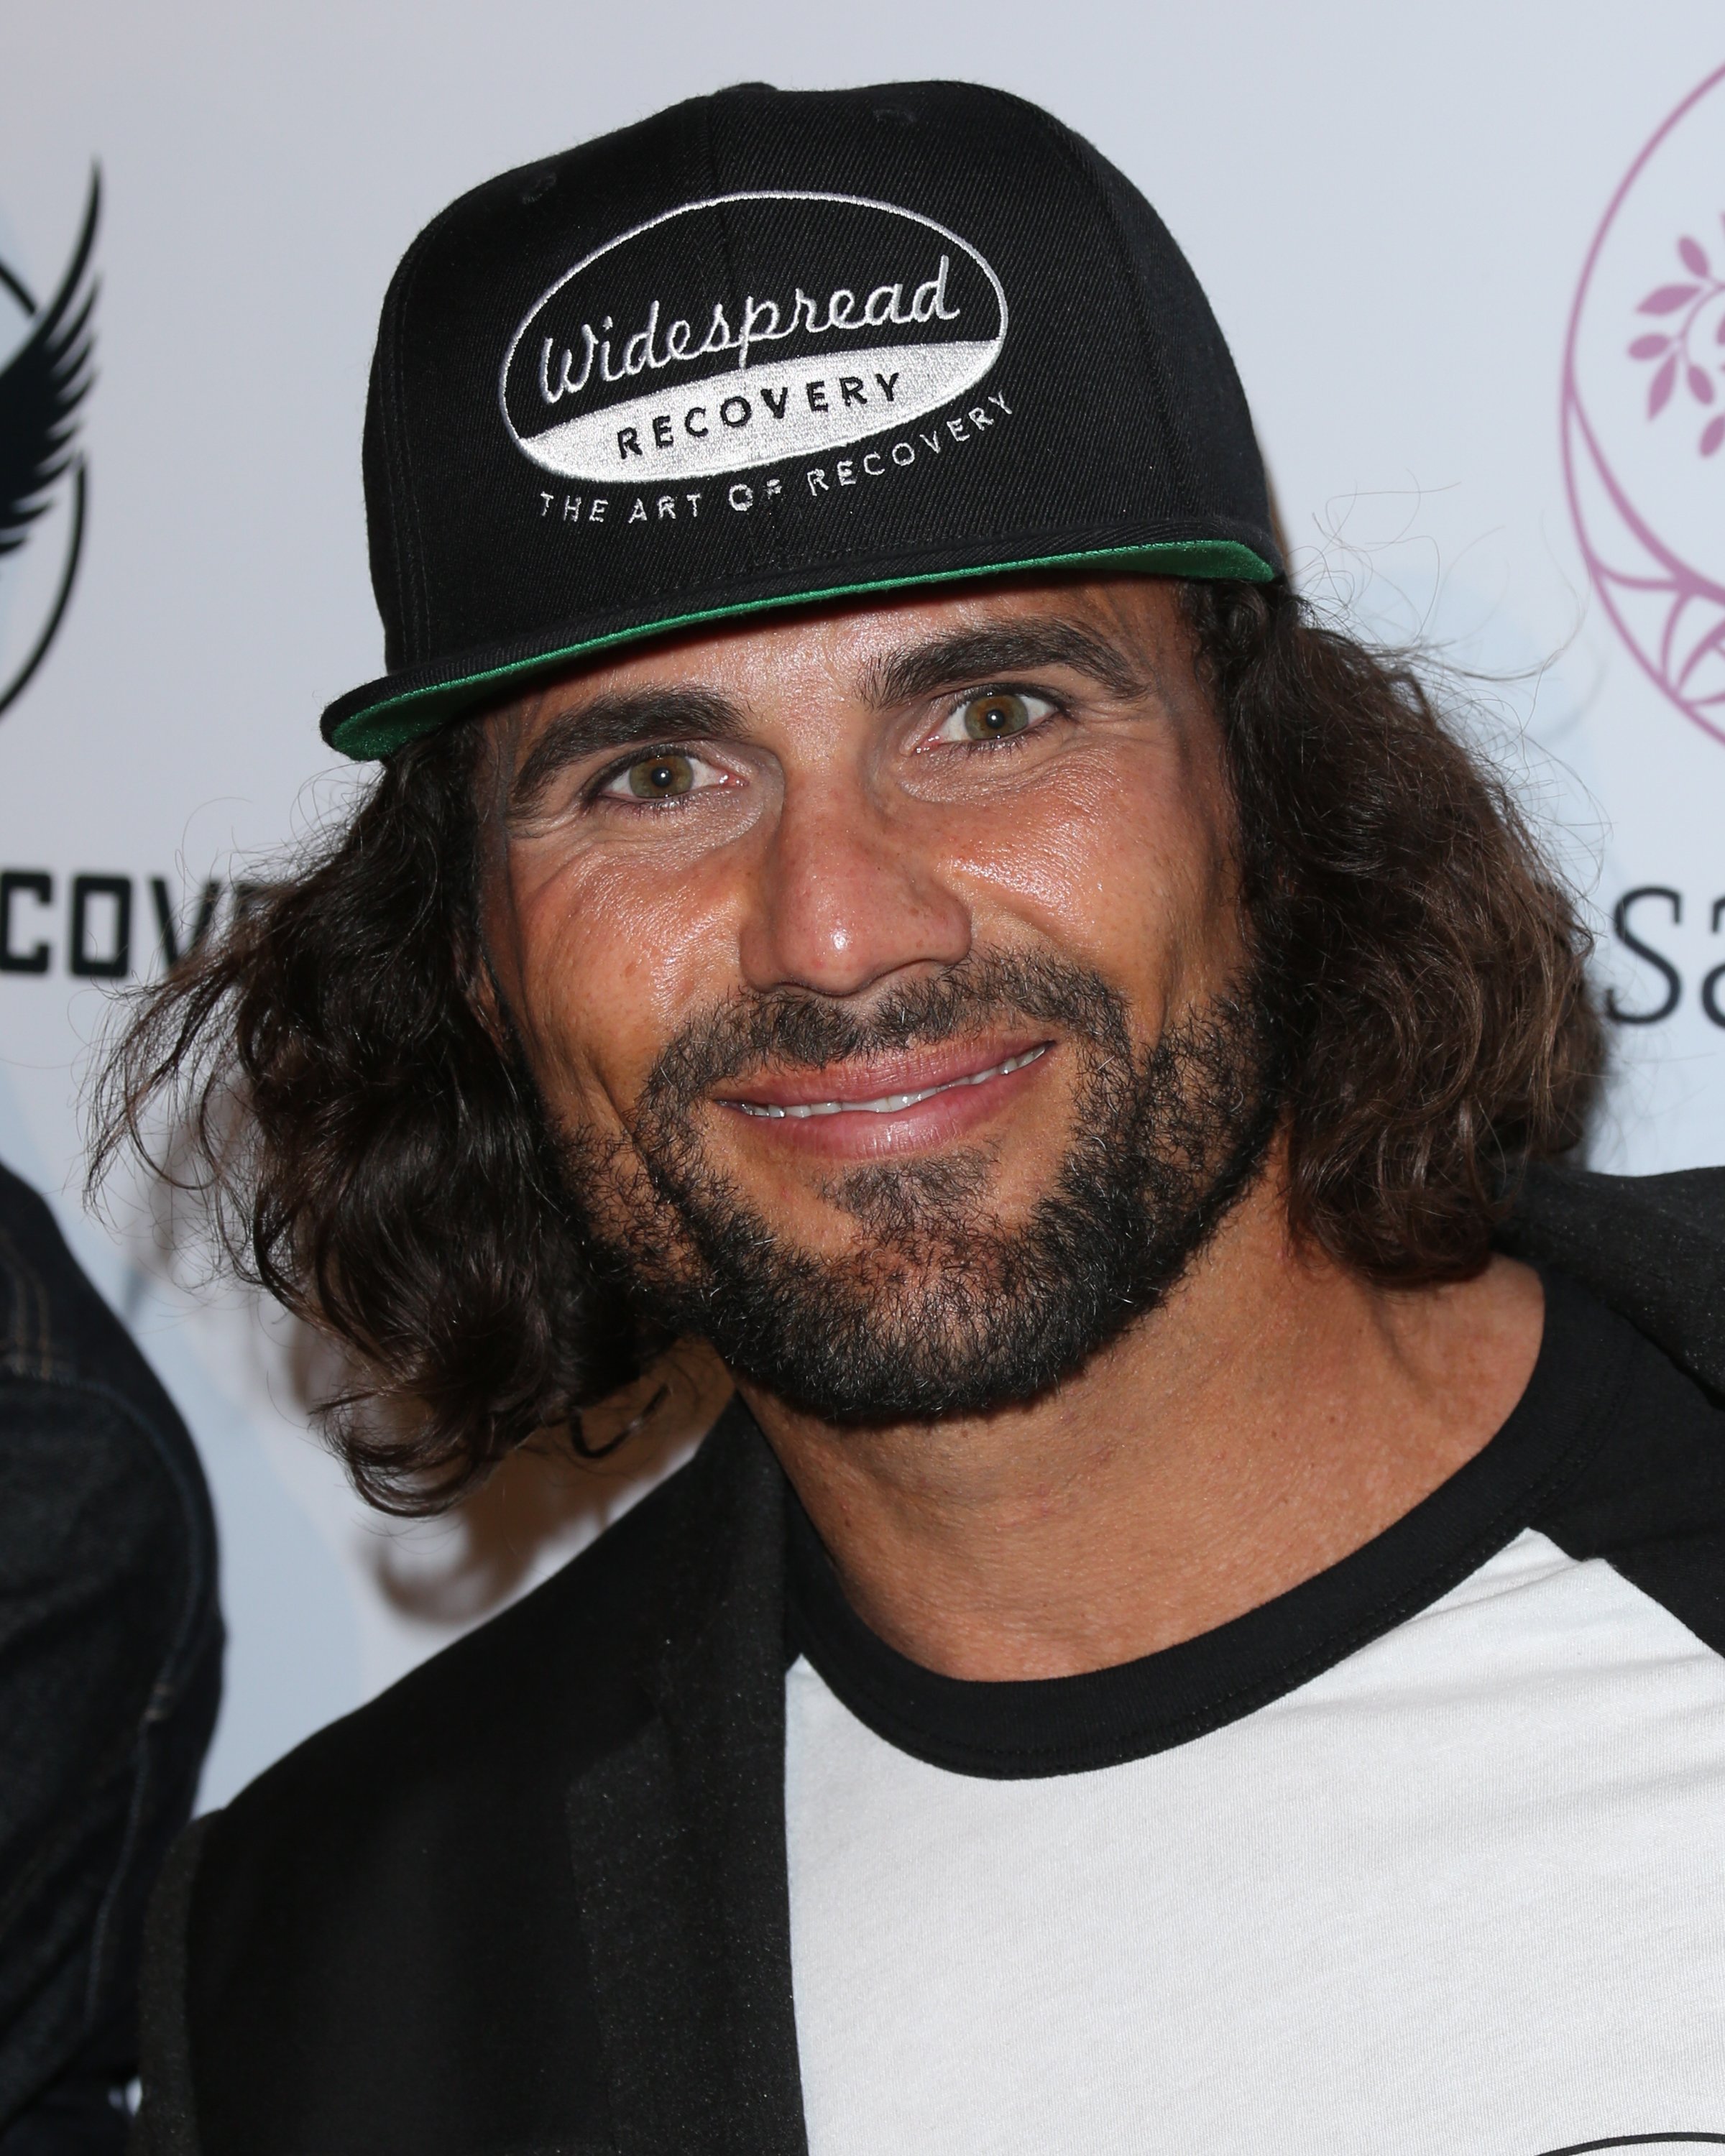 Actor Jeremy Jackson attends the "Rock To Recovery" bvenefit at The Fonda Theatre on October 2, 2016 in Los Angeles, California. | Source: Getty Images